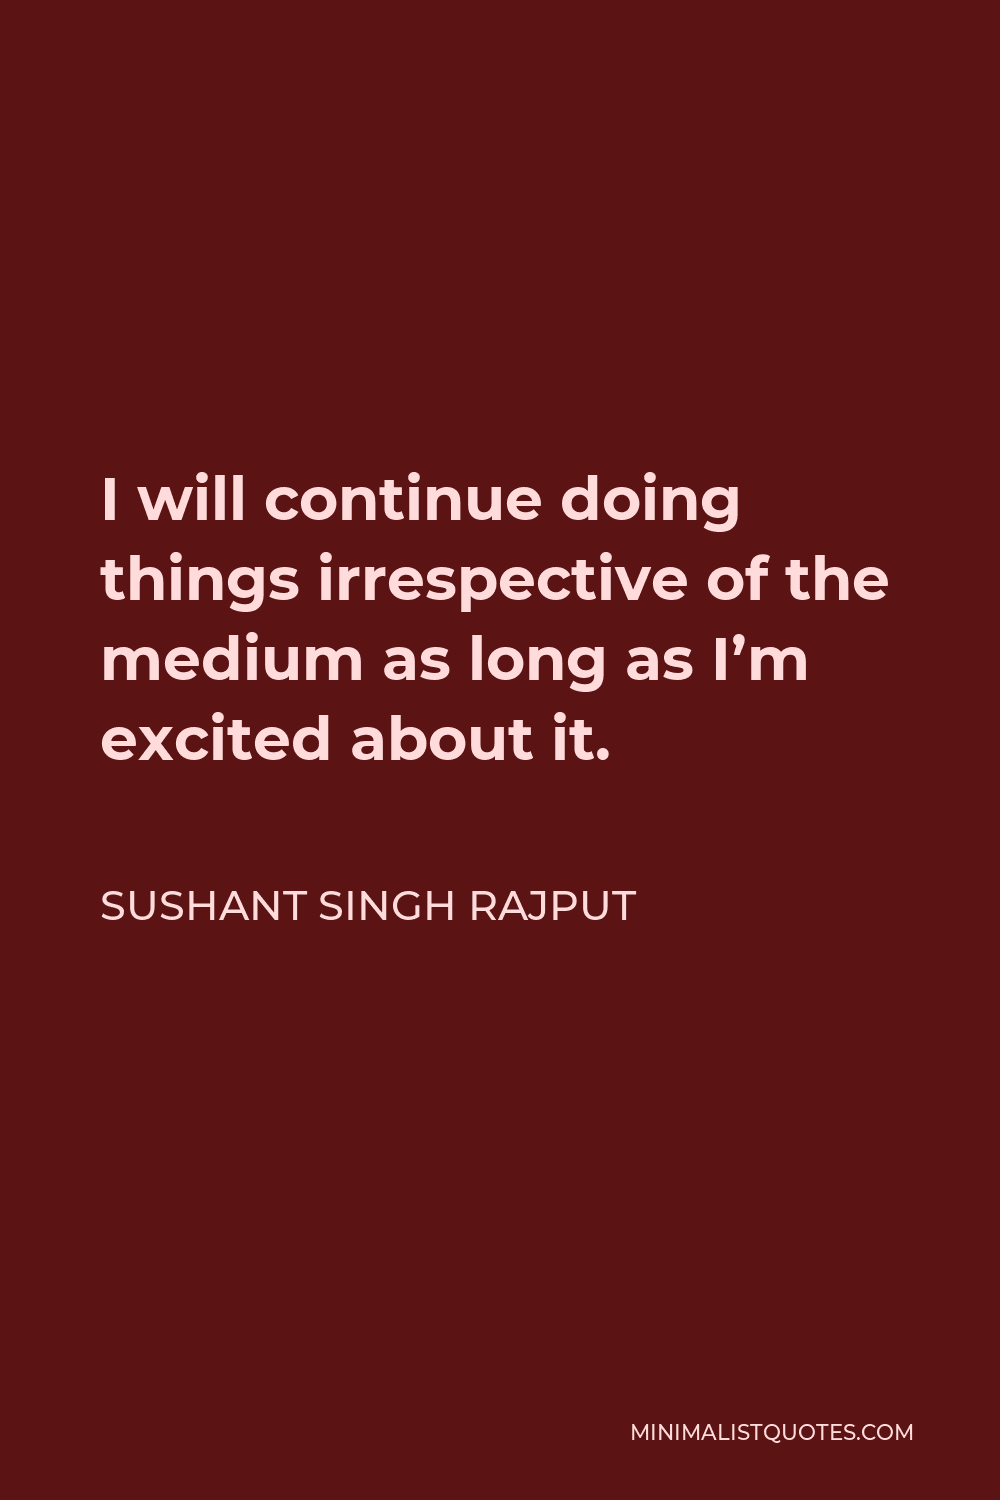 Sushant Singh Rajput Quote - I will continue doing things irrespective of the medium as long as I’m excited about it.